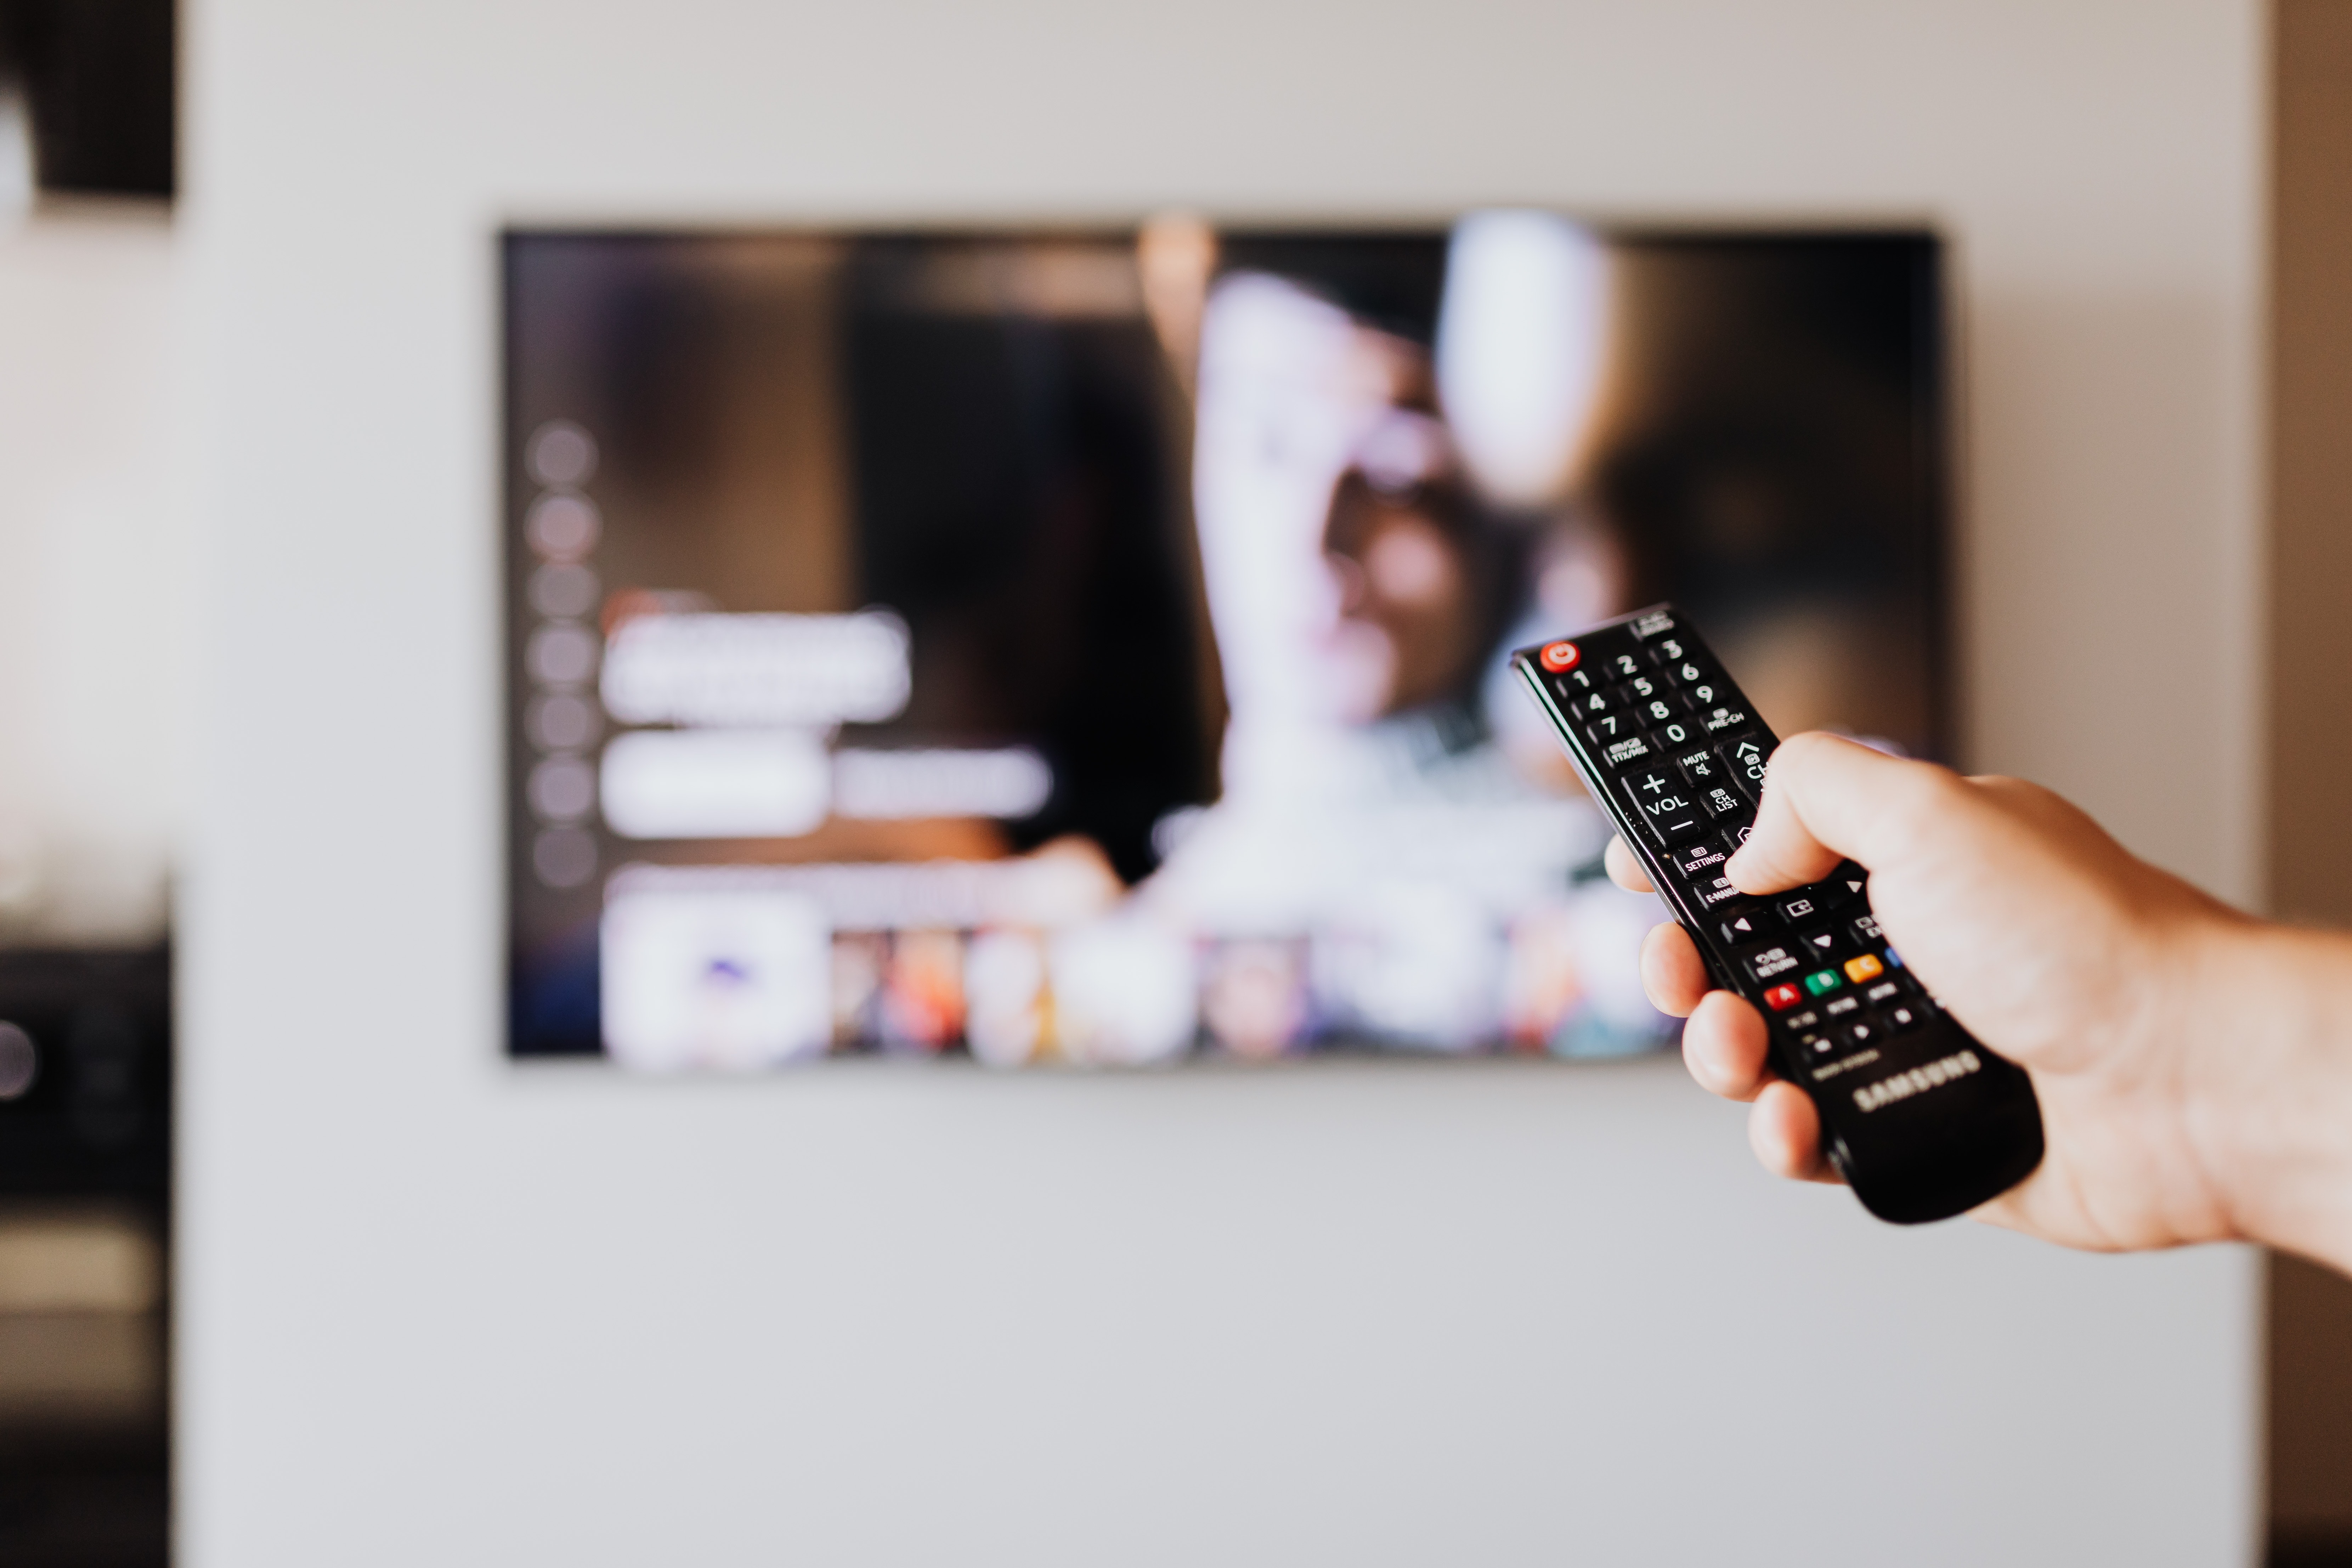 SABC wants to charge a household levy on all devices